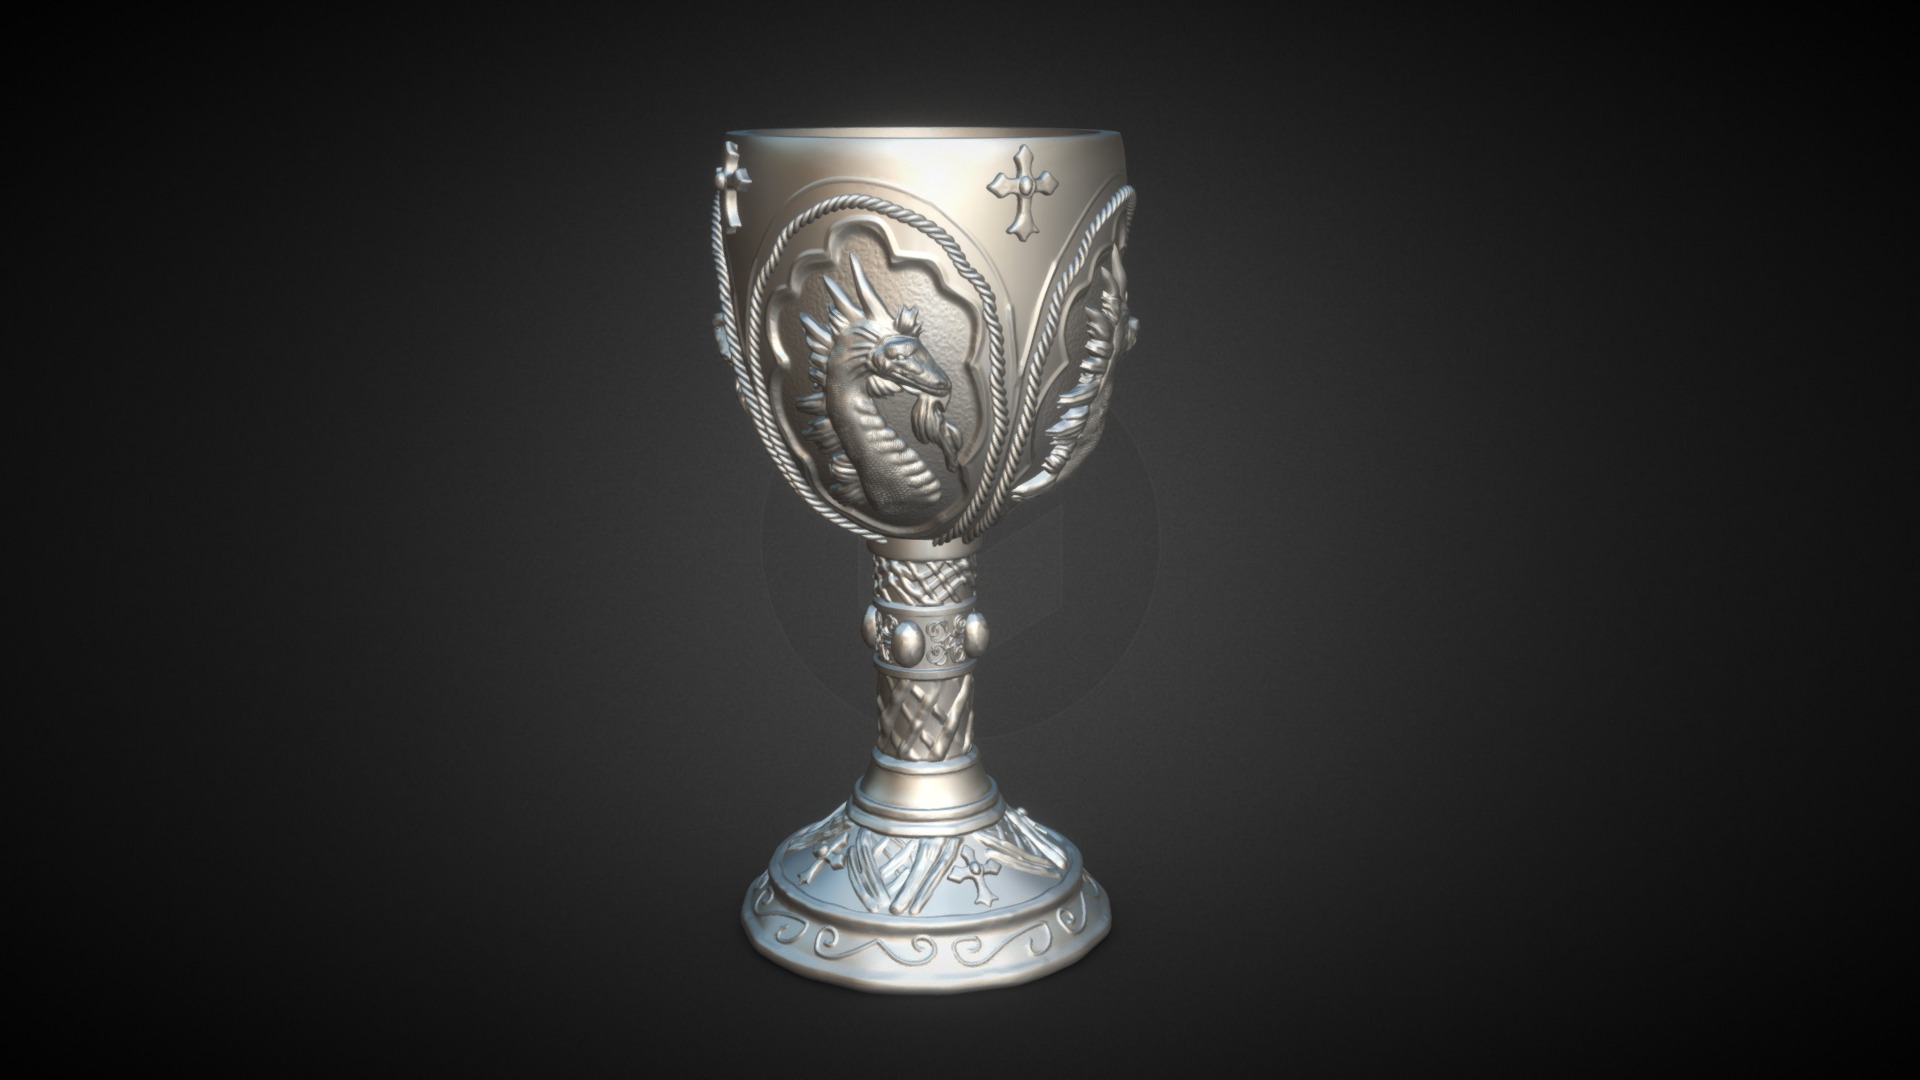 3D model Day 26 Dragon Cup - This is a 3D model of the Day 26 Dragon Cup. The 3D model is about a gold trophy with a black background.